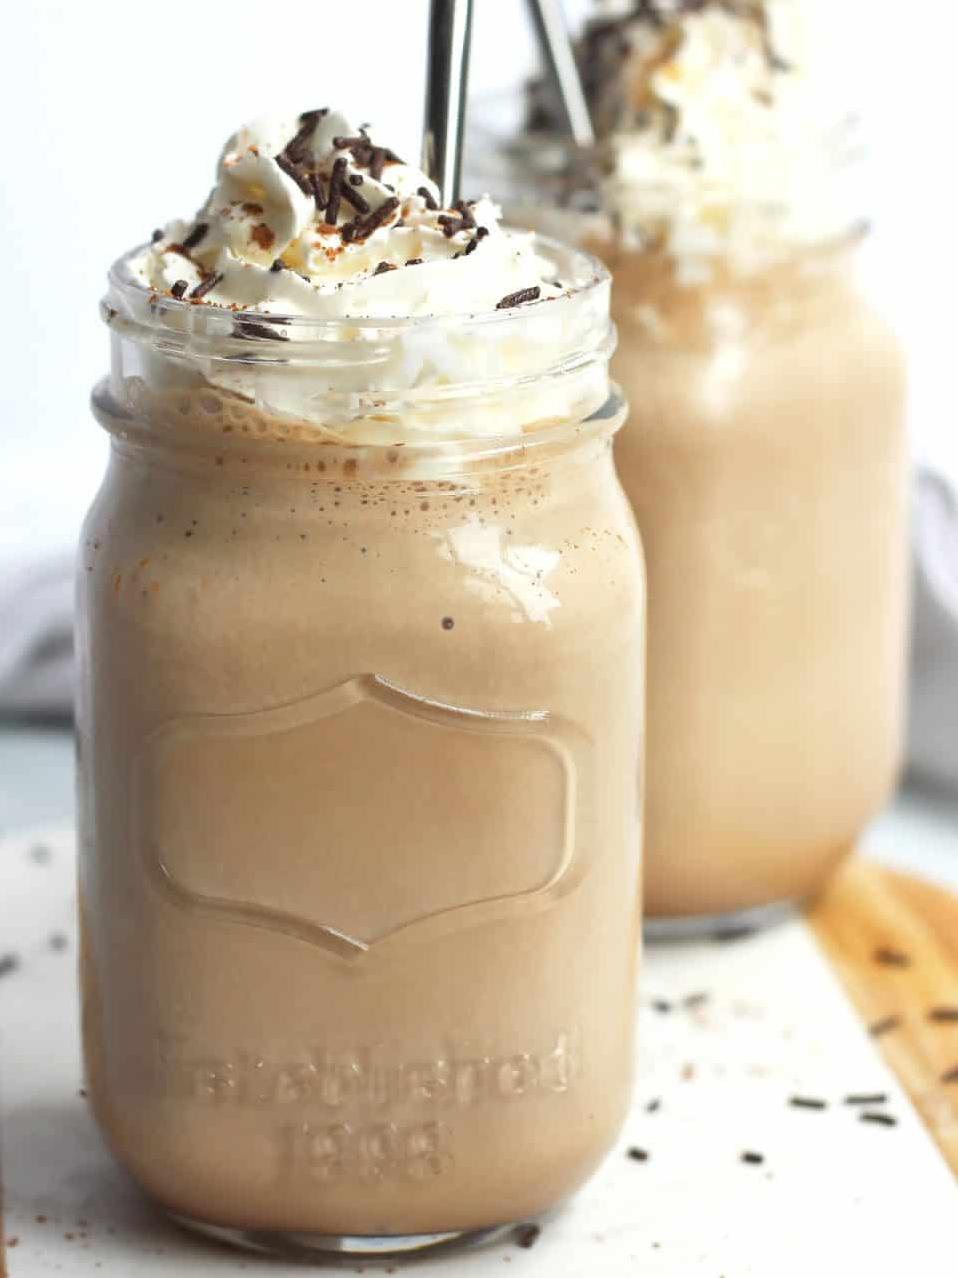  Are you a coffee-lover? This Mocha Shake is for you!